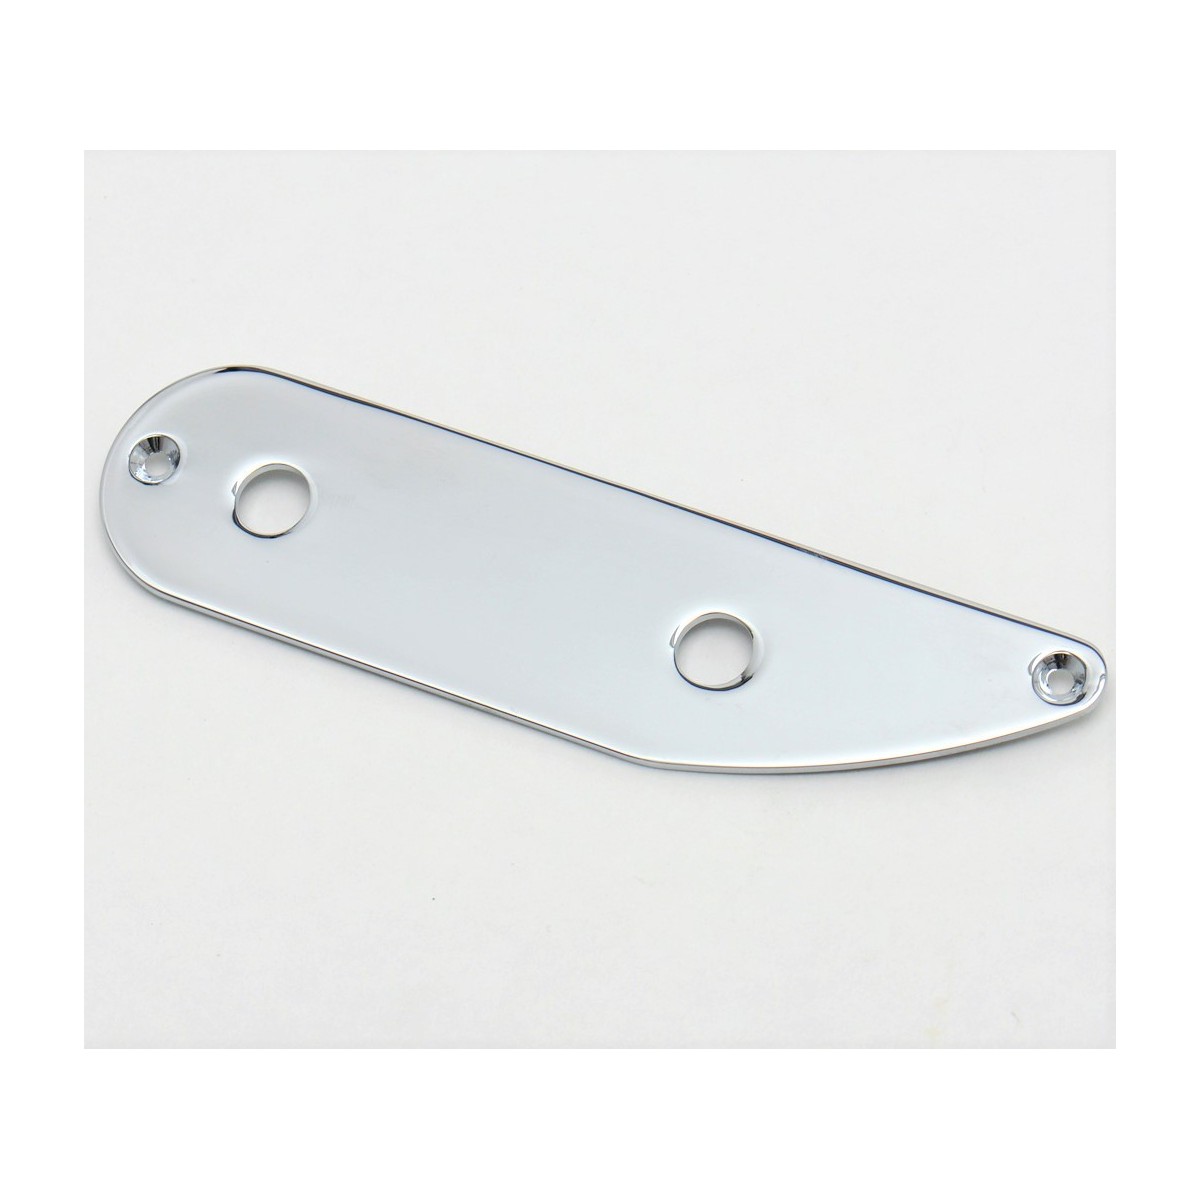 PRECISION BASS 51 TYPE CONTROL PLATE